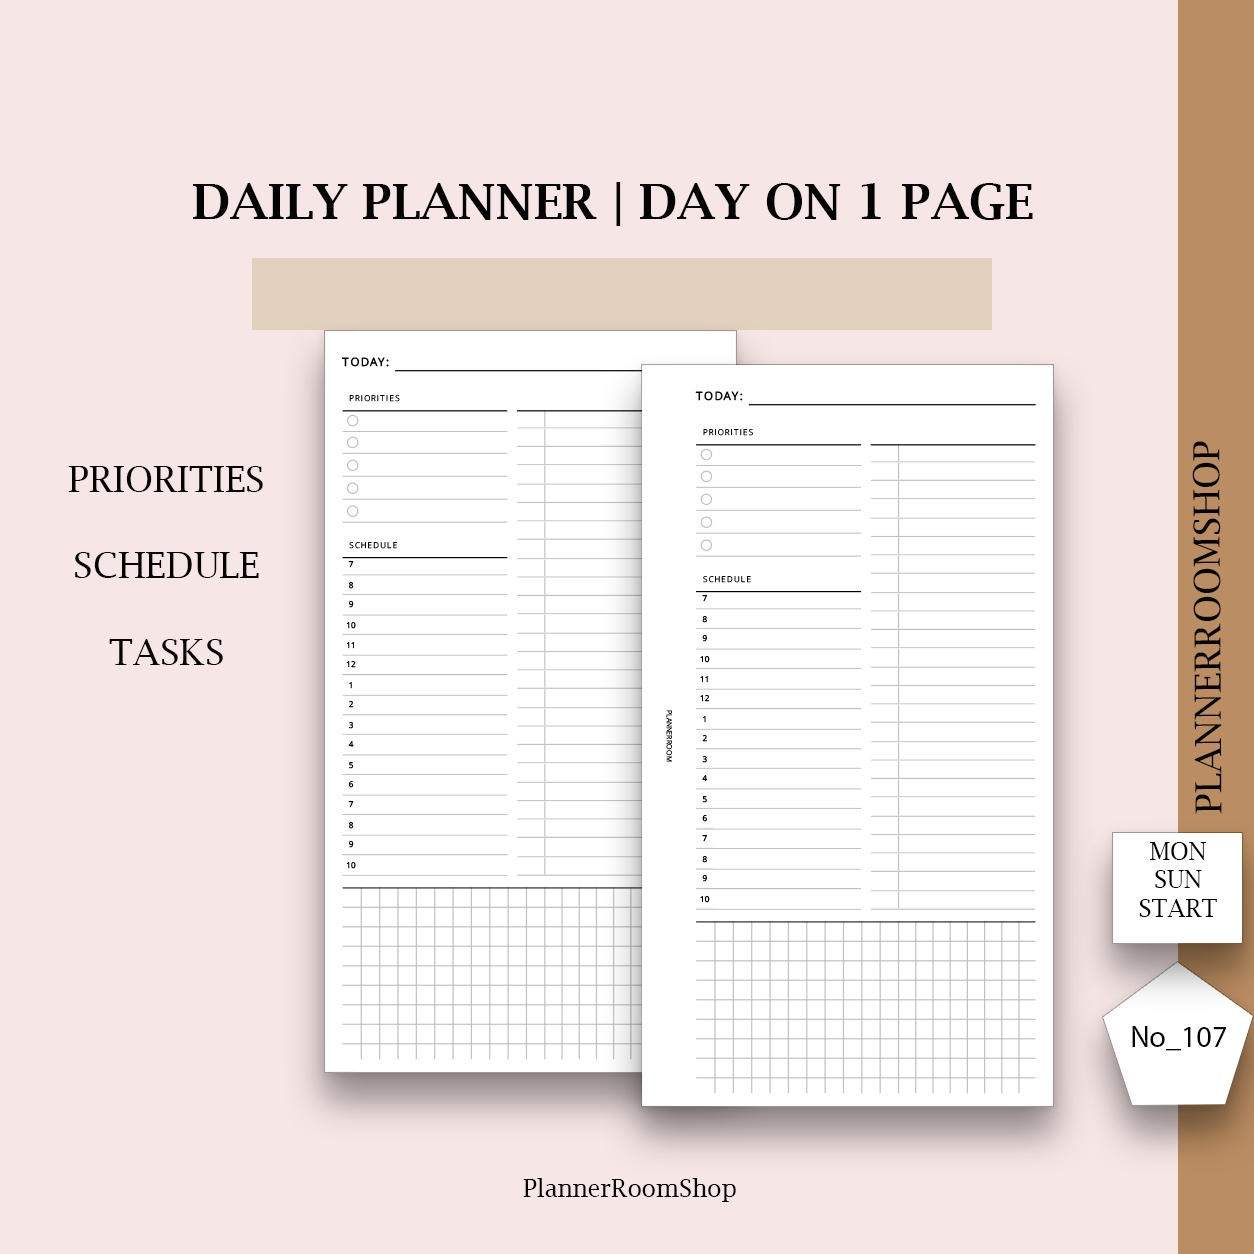 Daily planner | Printable inserts - 107